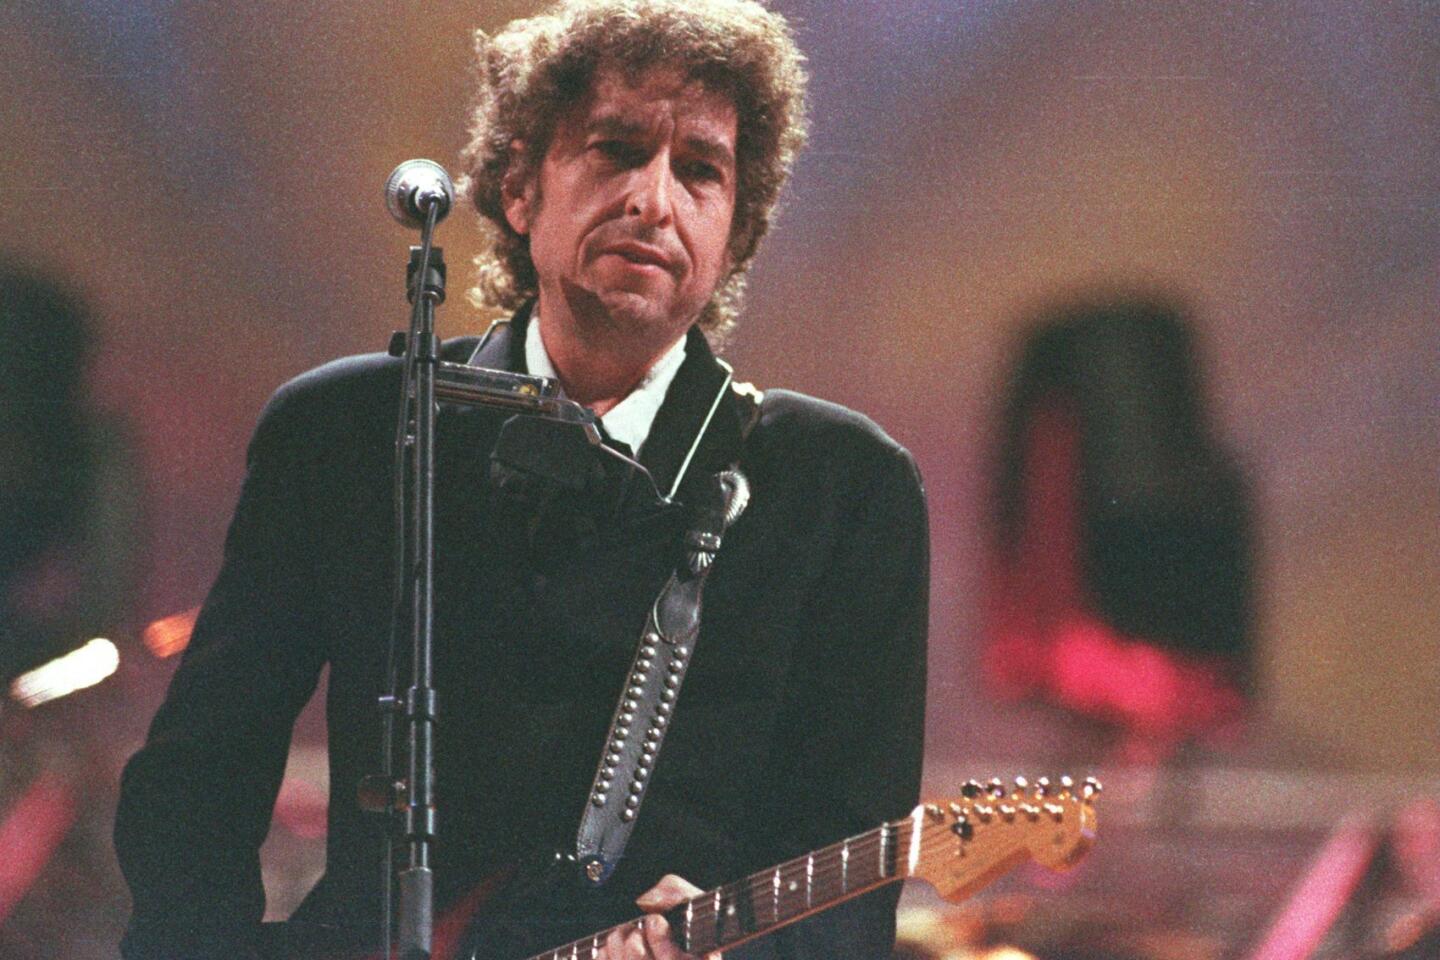 Bob Dylan: Life in pictures